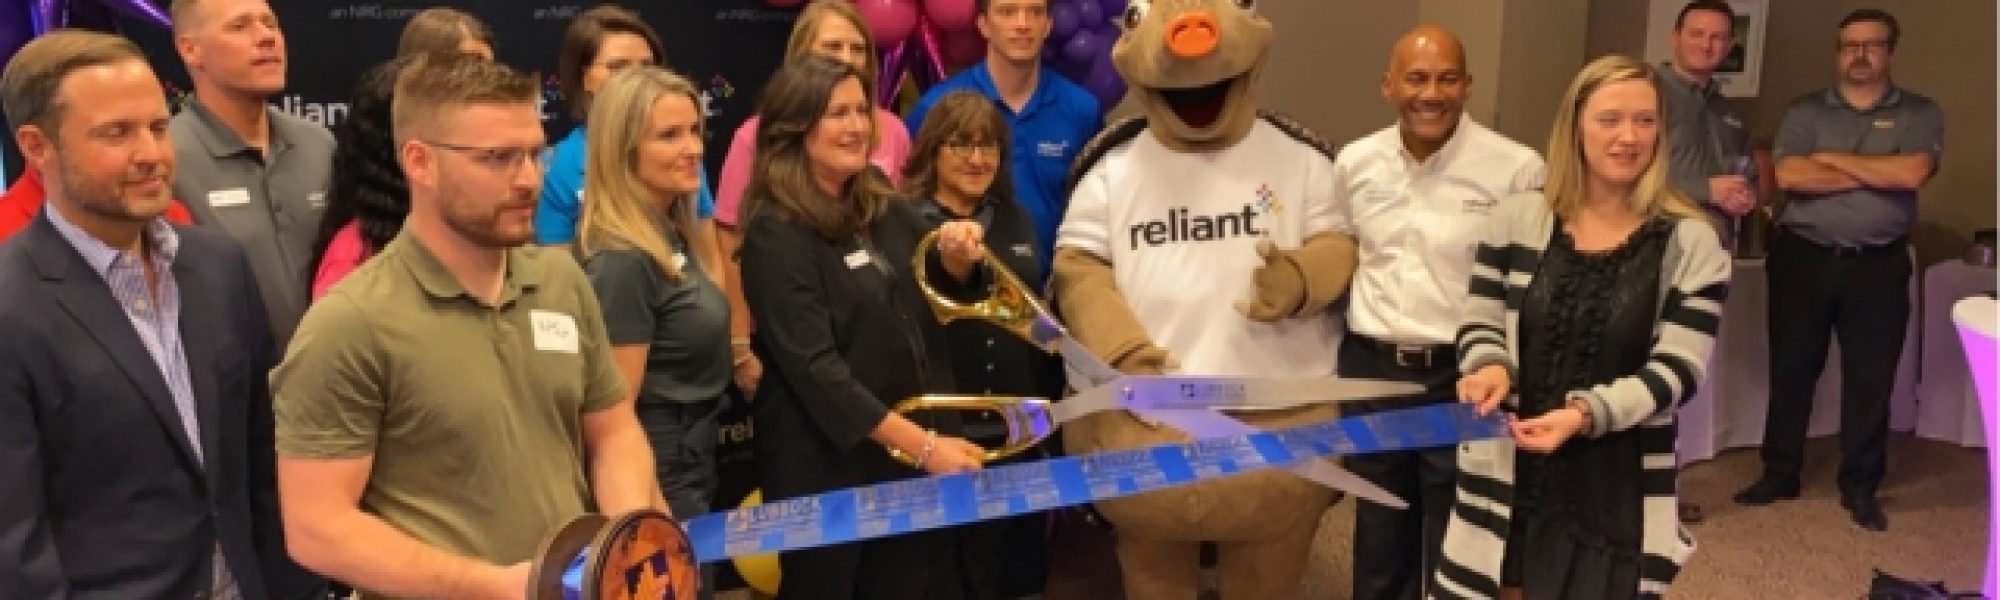 Reliant Energy holds ribbon cutting for new Lubbock office